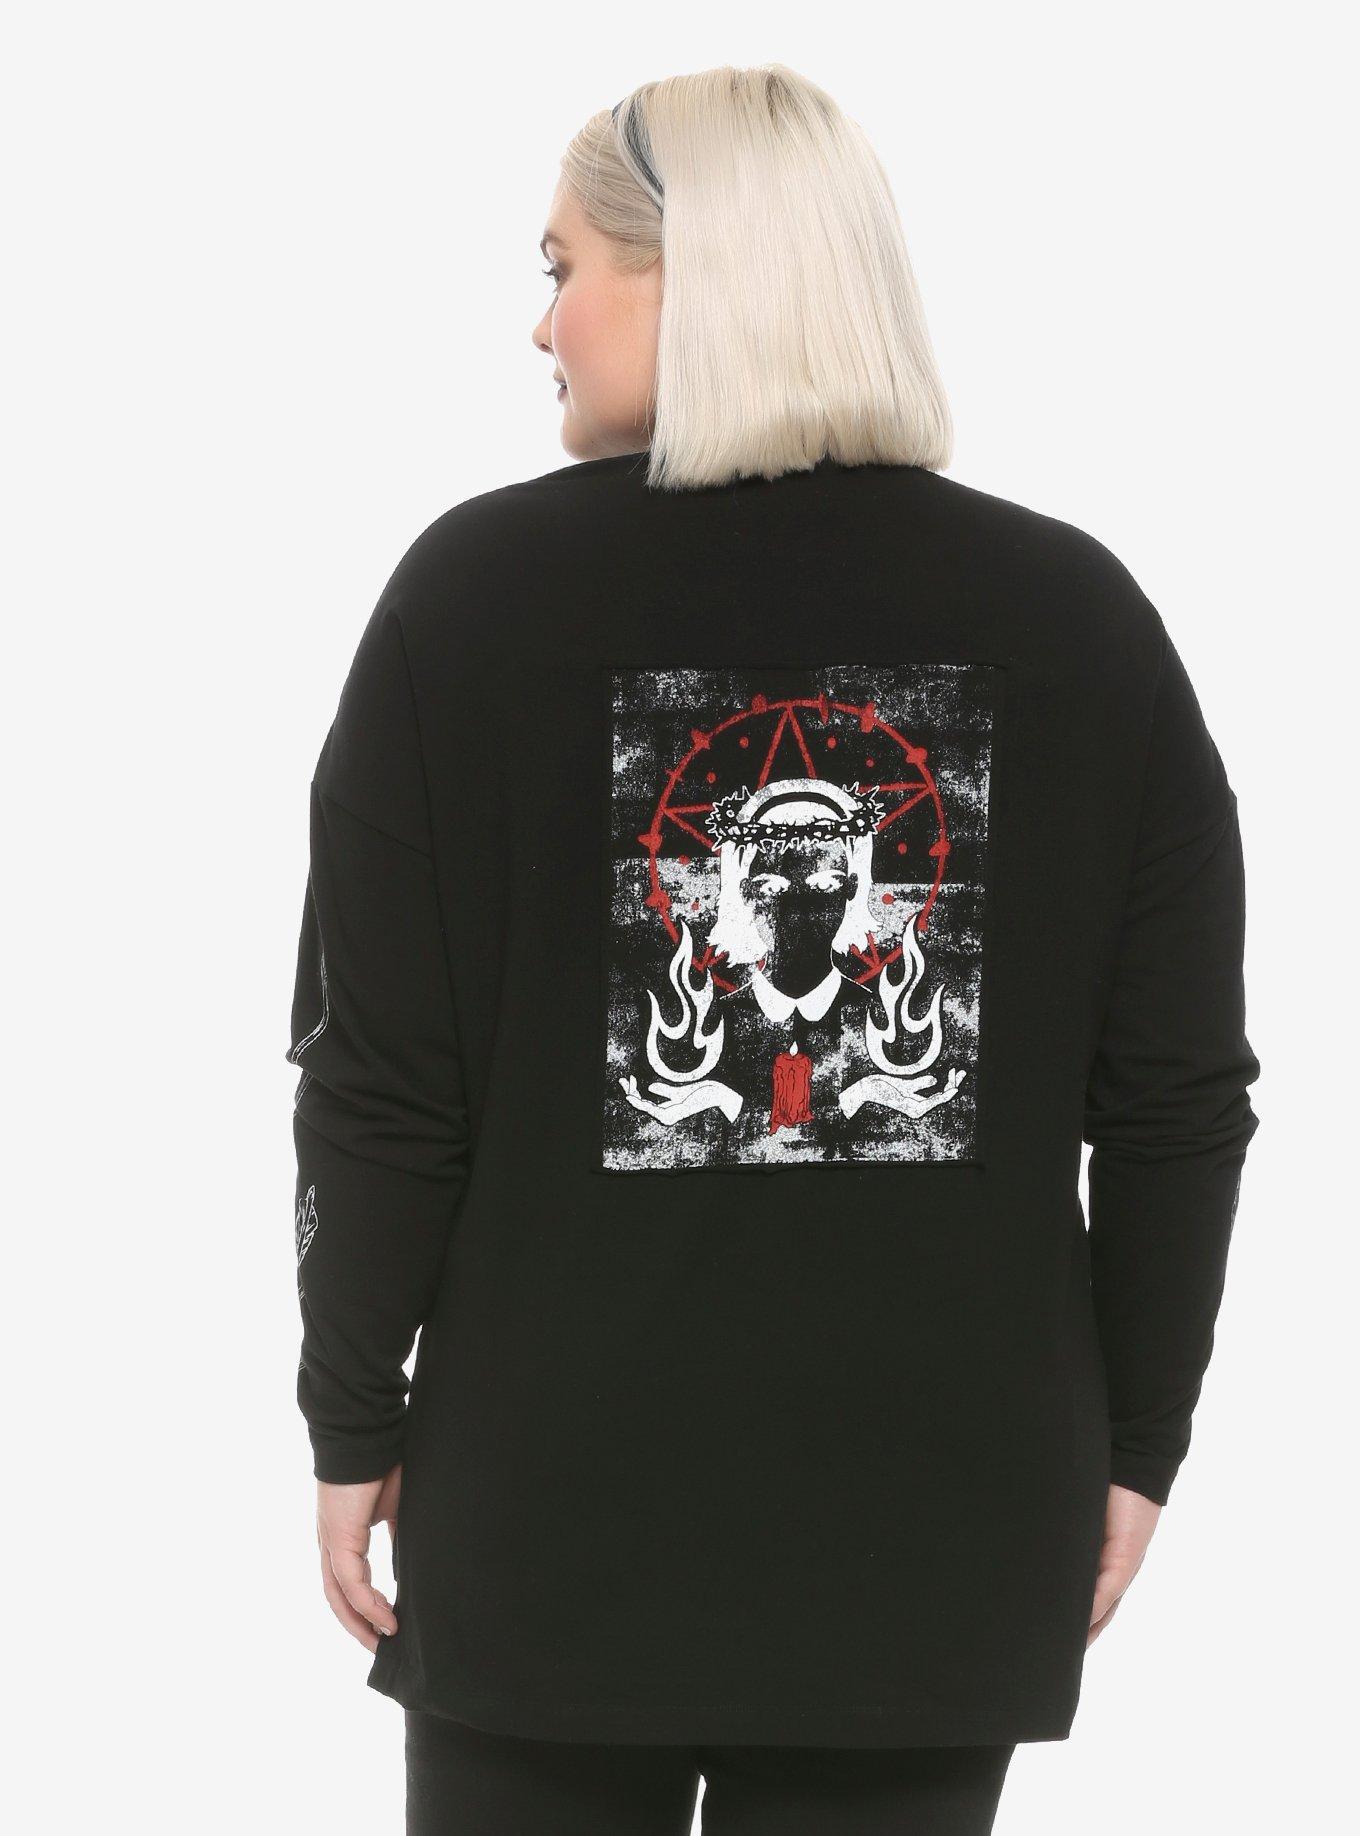 Chilling Adventures Of Sabrina Herald Of Hell Half-Zipper Girls Long-Sleeve T-Shirt Plus Size, MULTI, hi-res